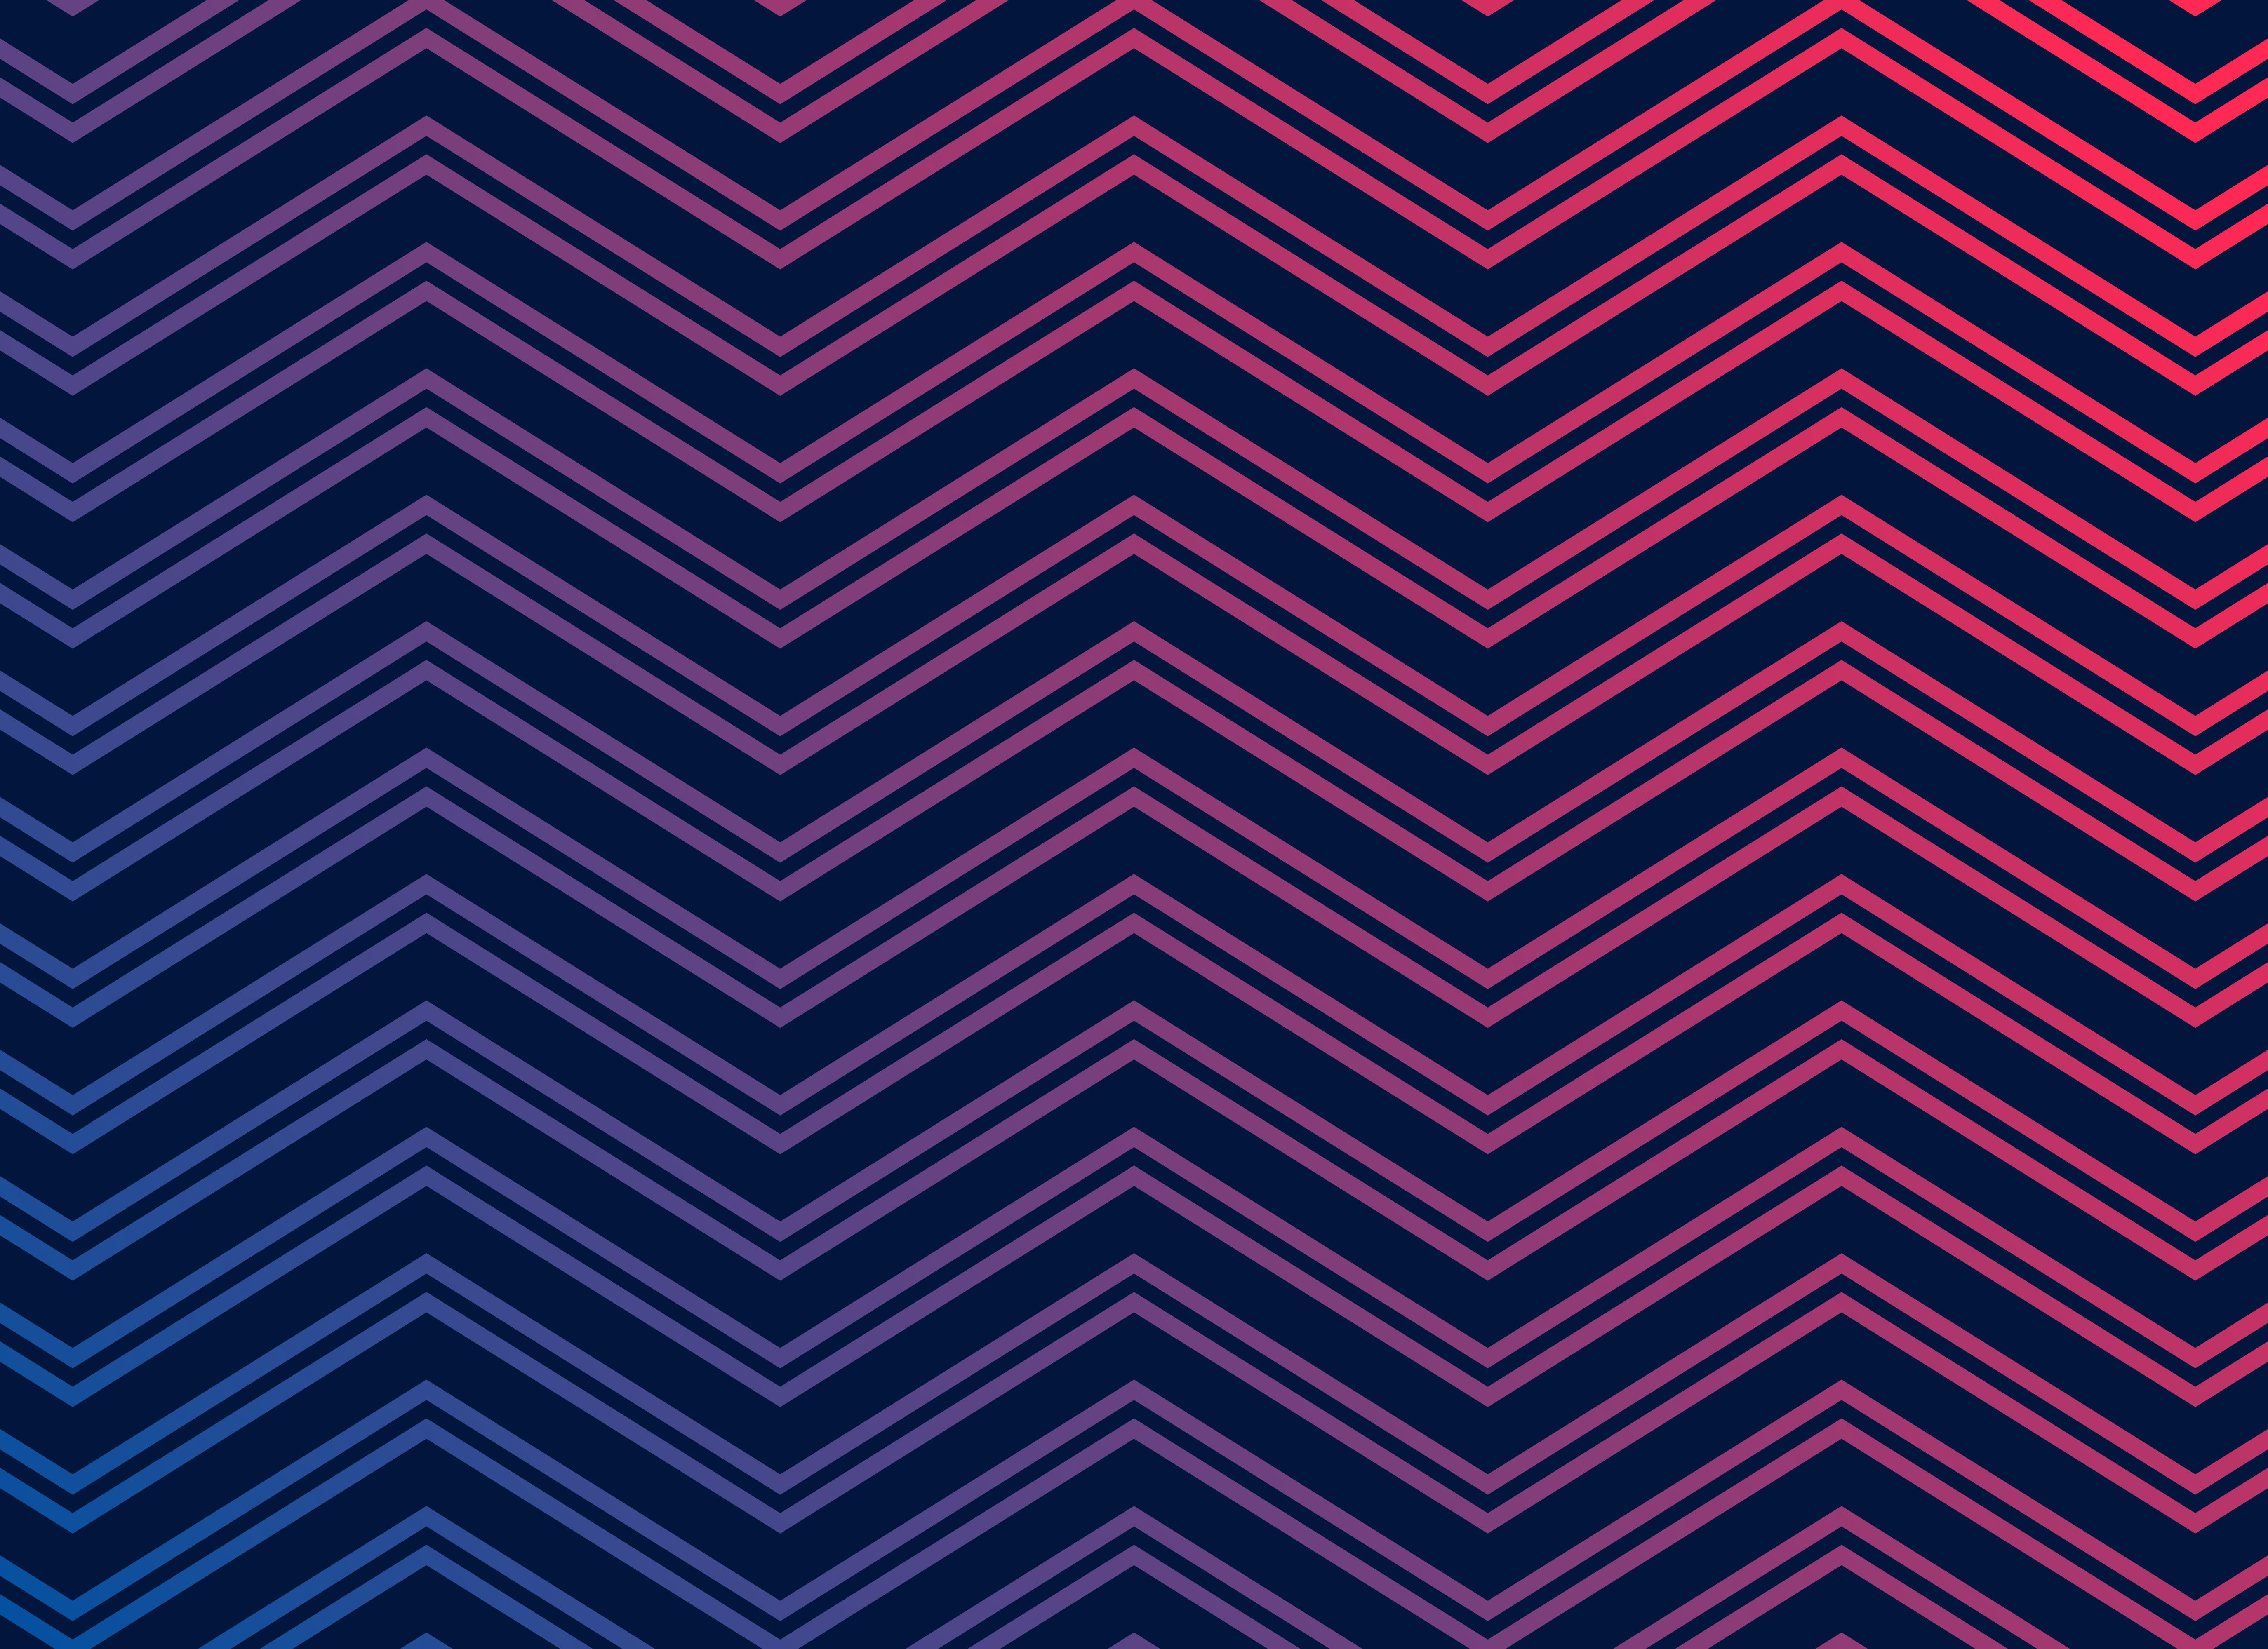  black  background  with vibrant zigzag pattern  Download 